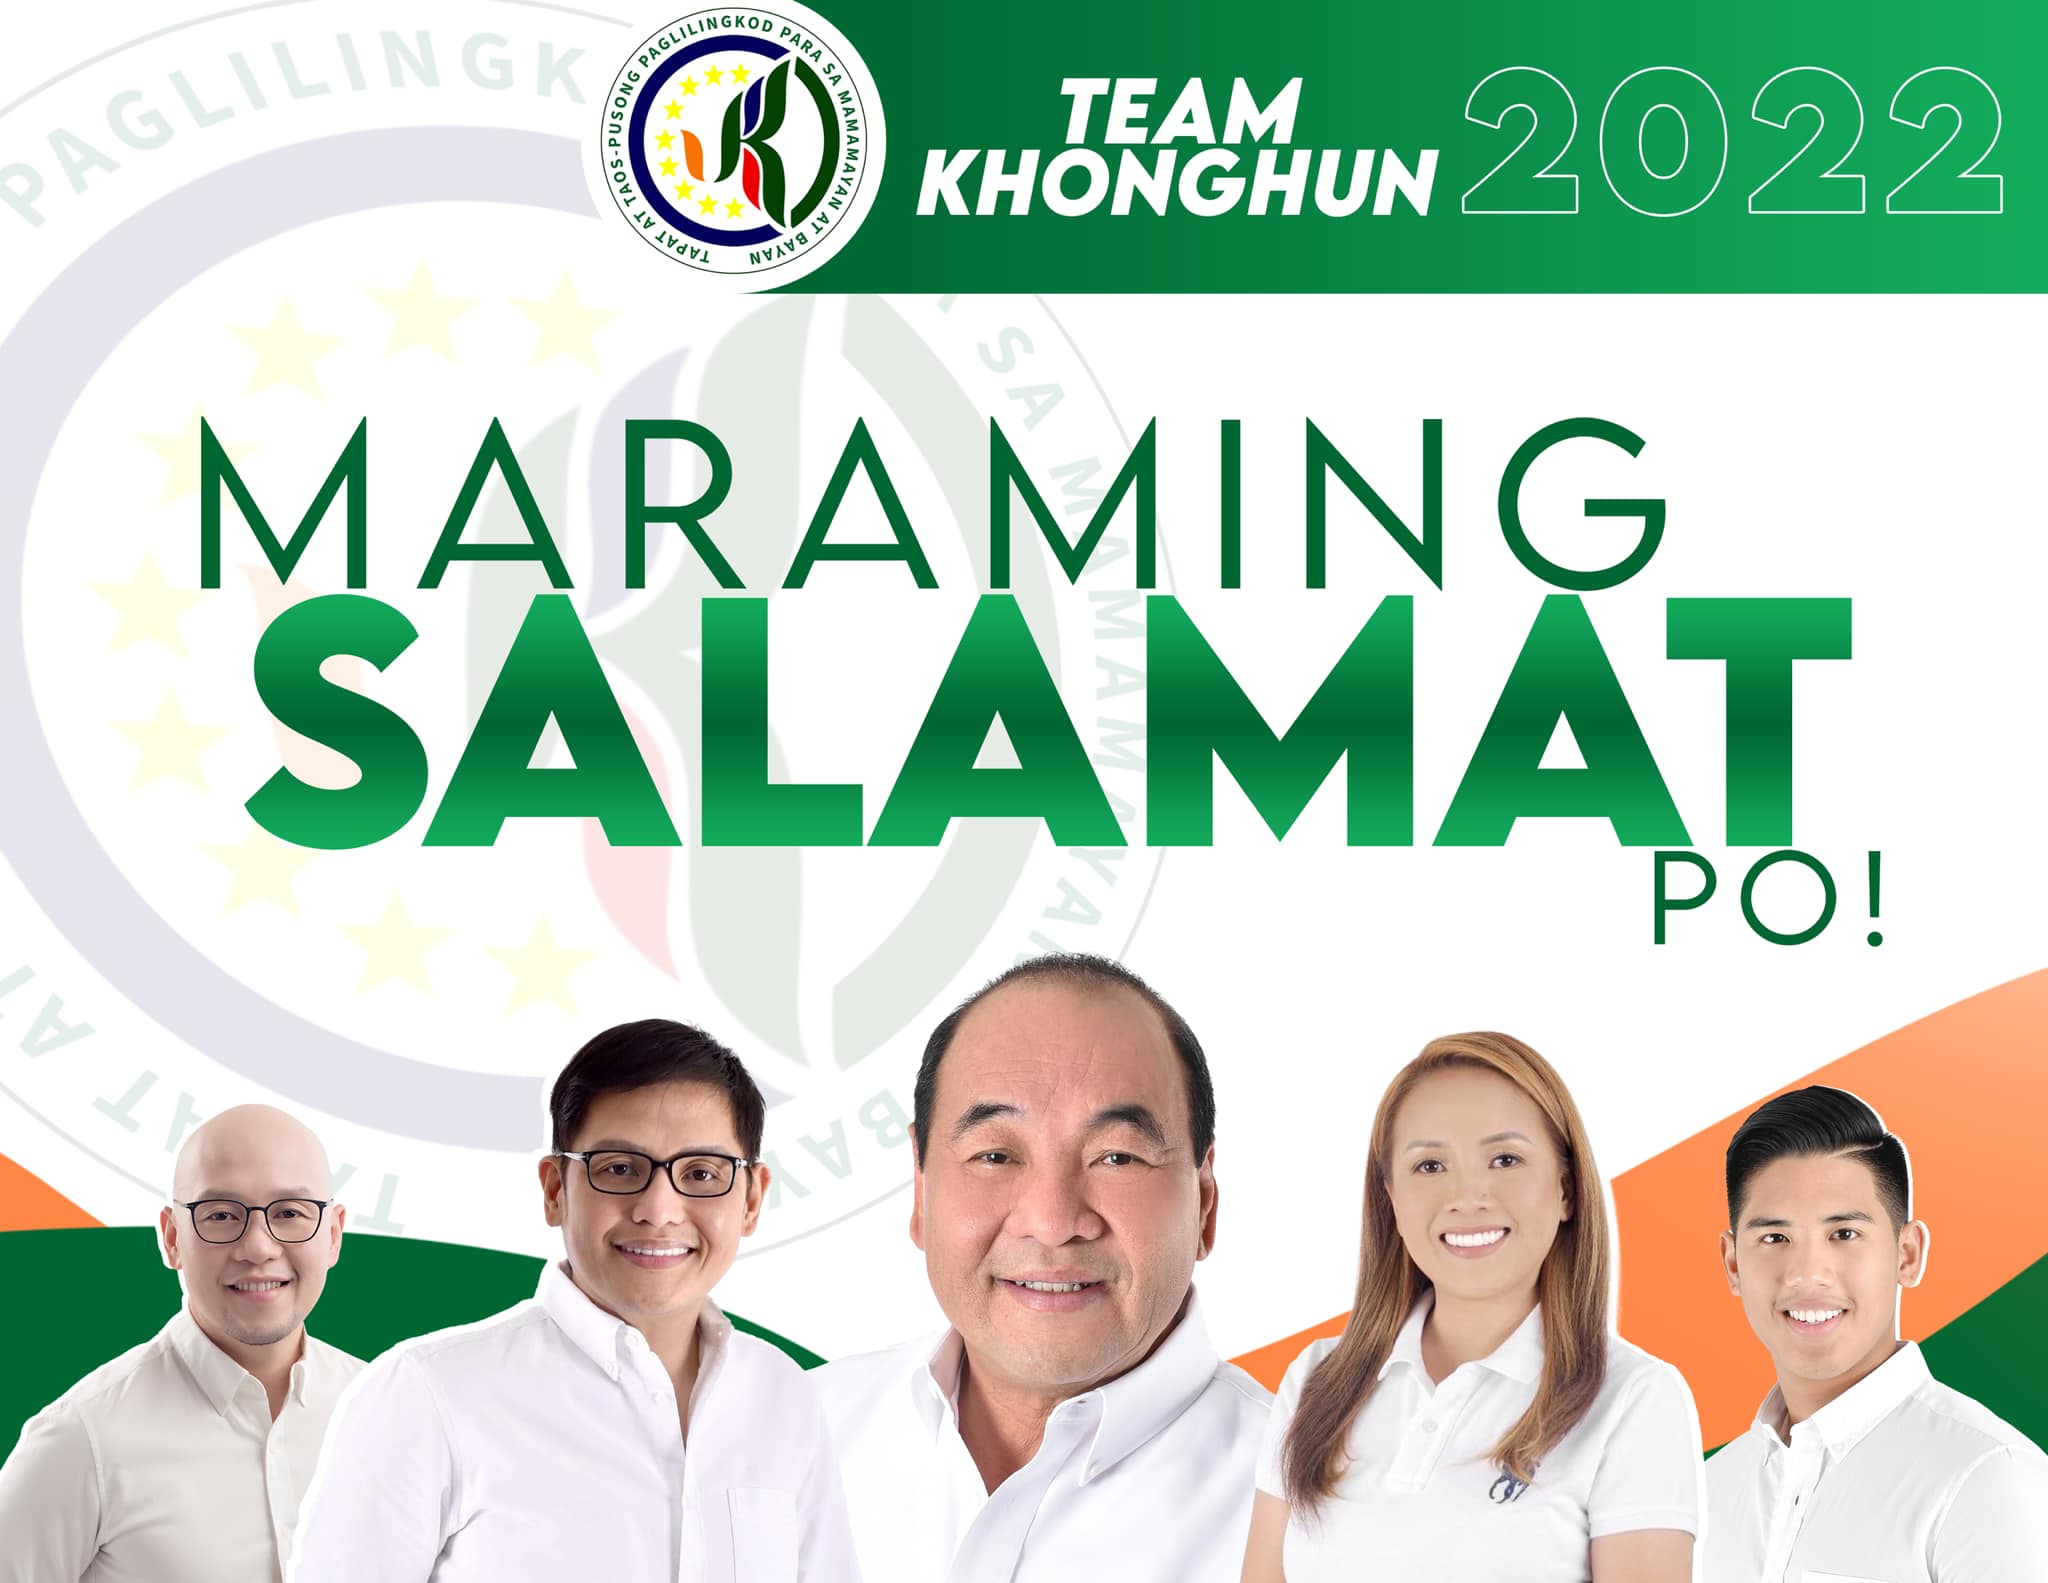 The political clan of the Khonghuns in Zambales